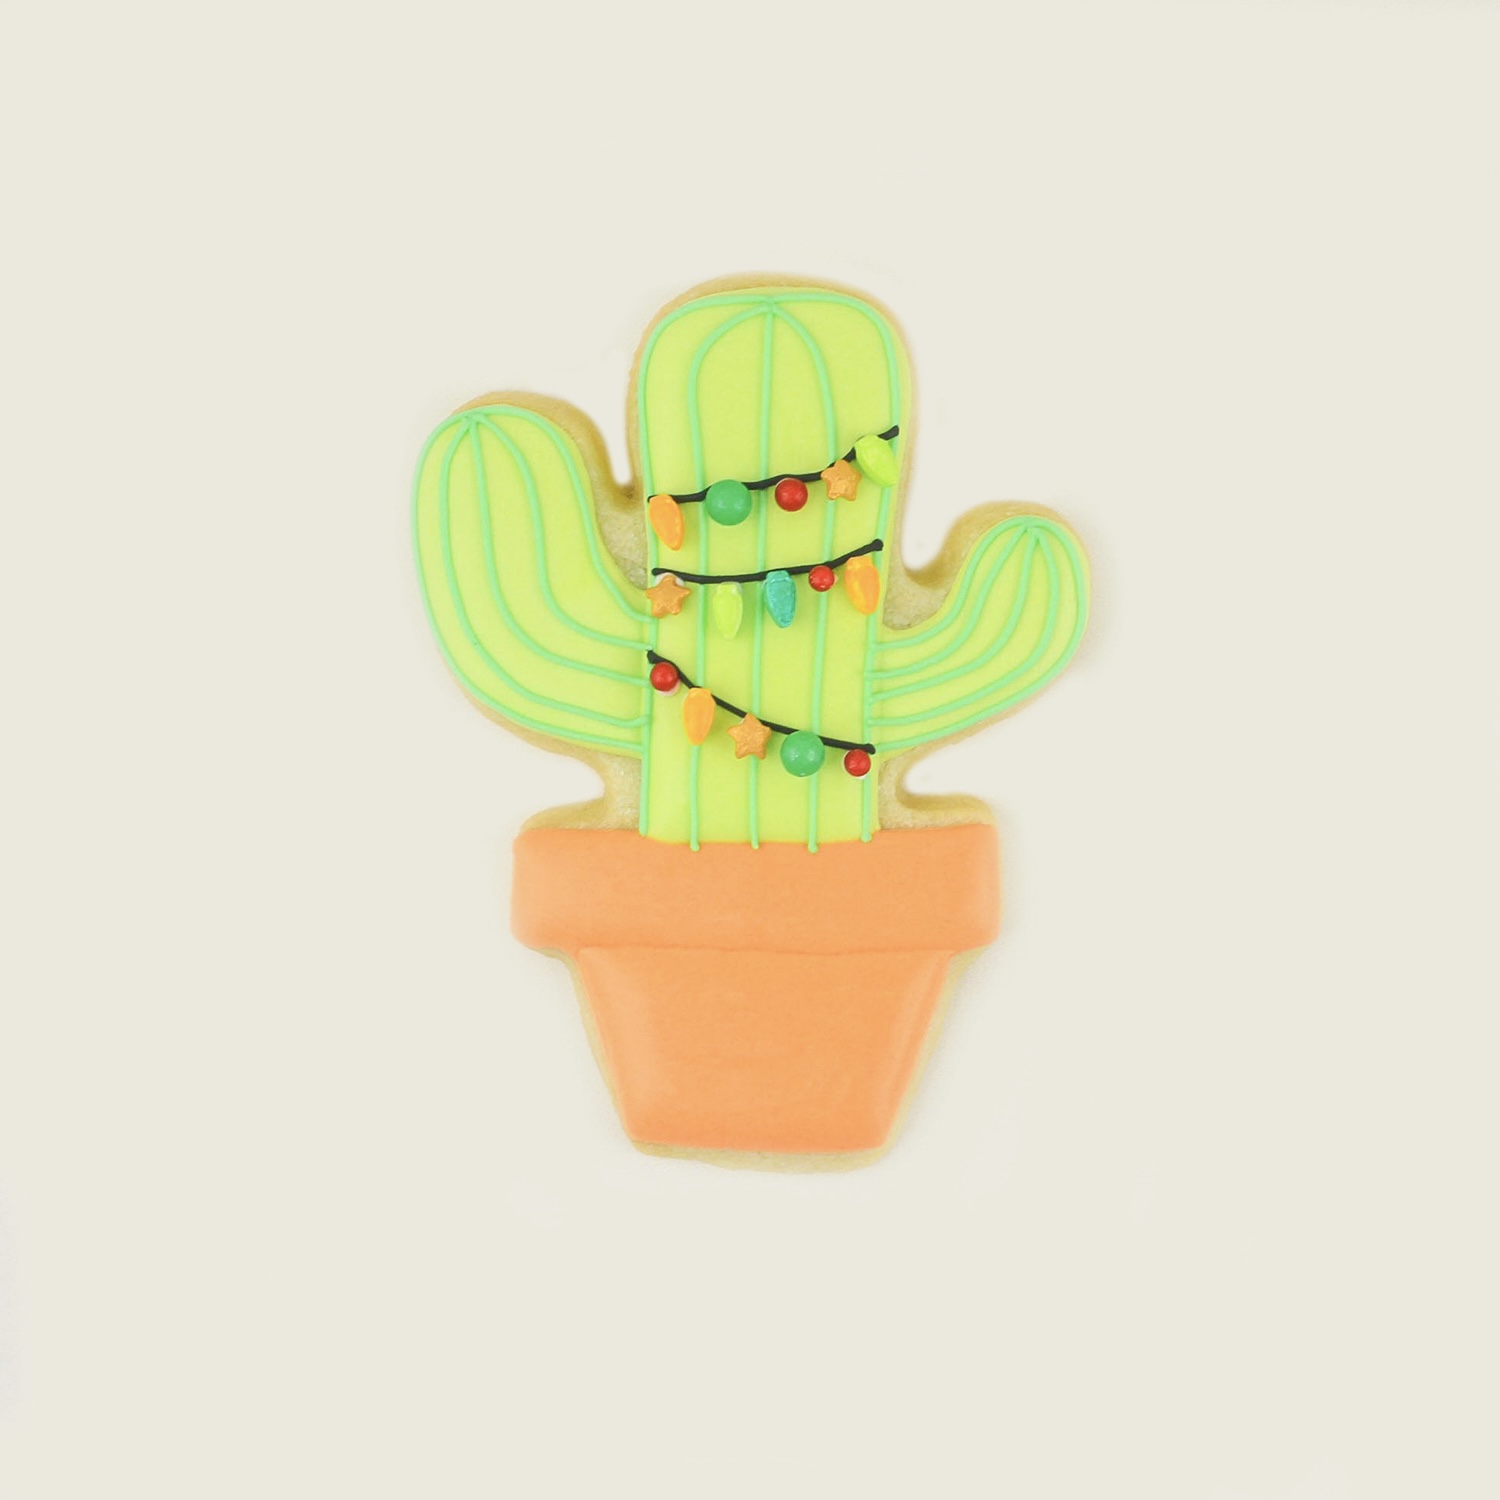 Royal icing cactus cookie adorned with Christmas lights